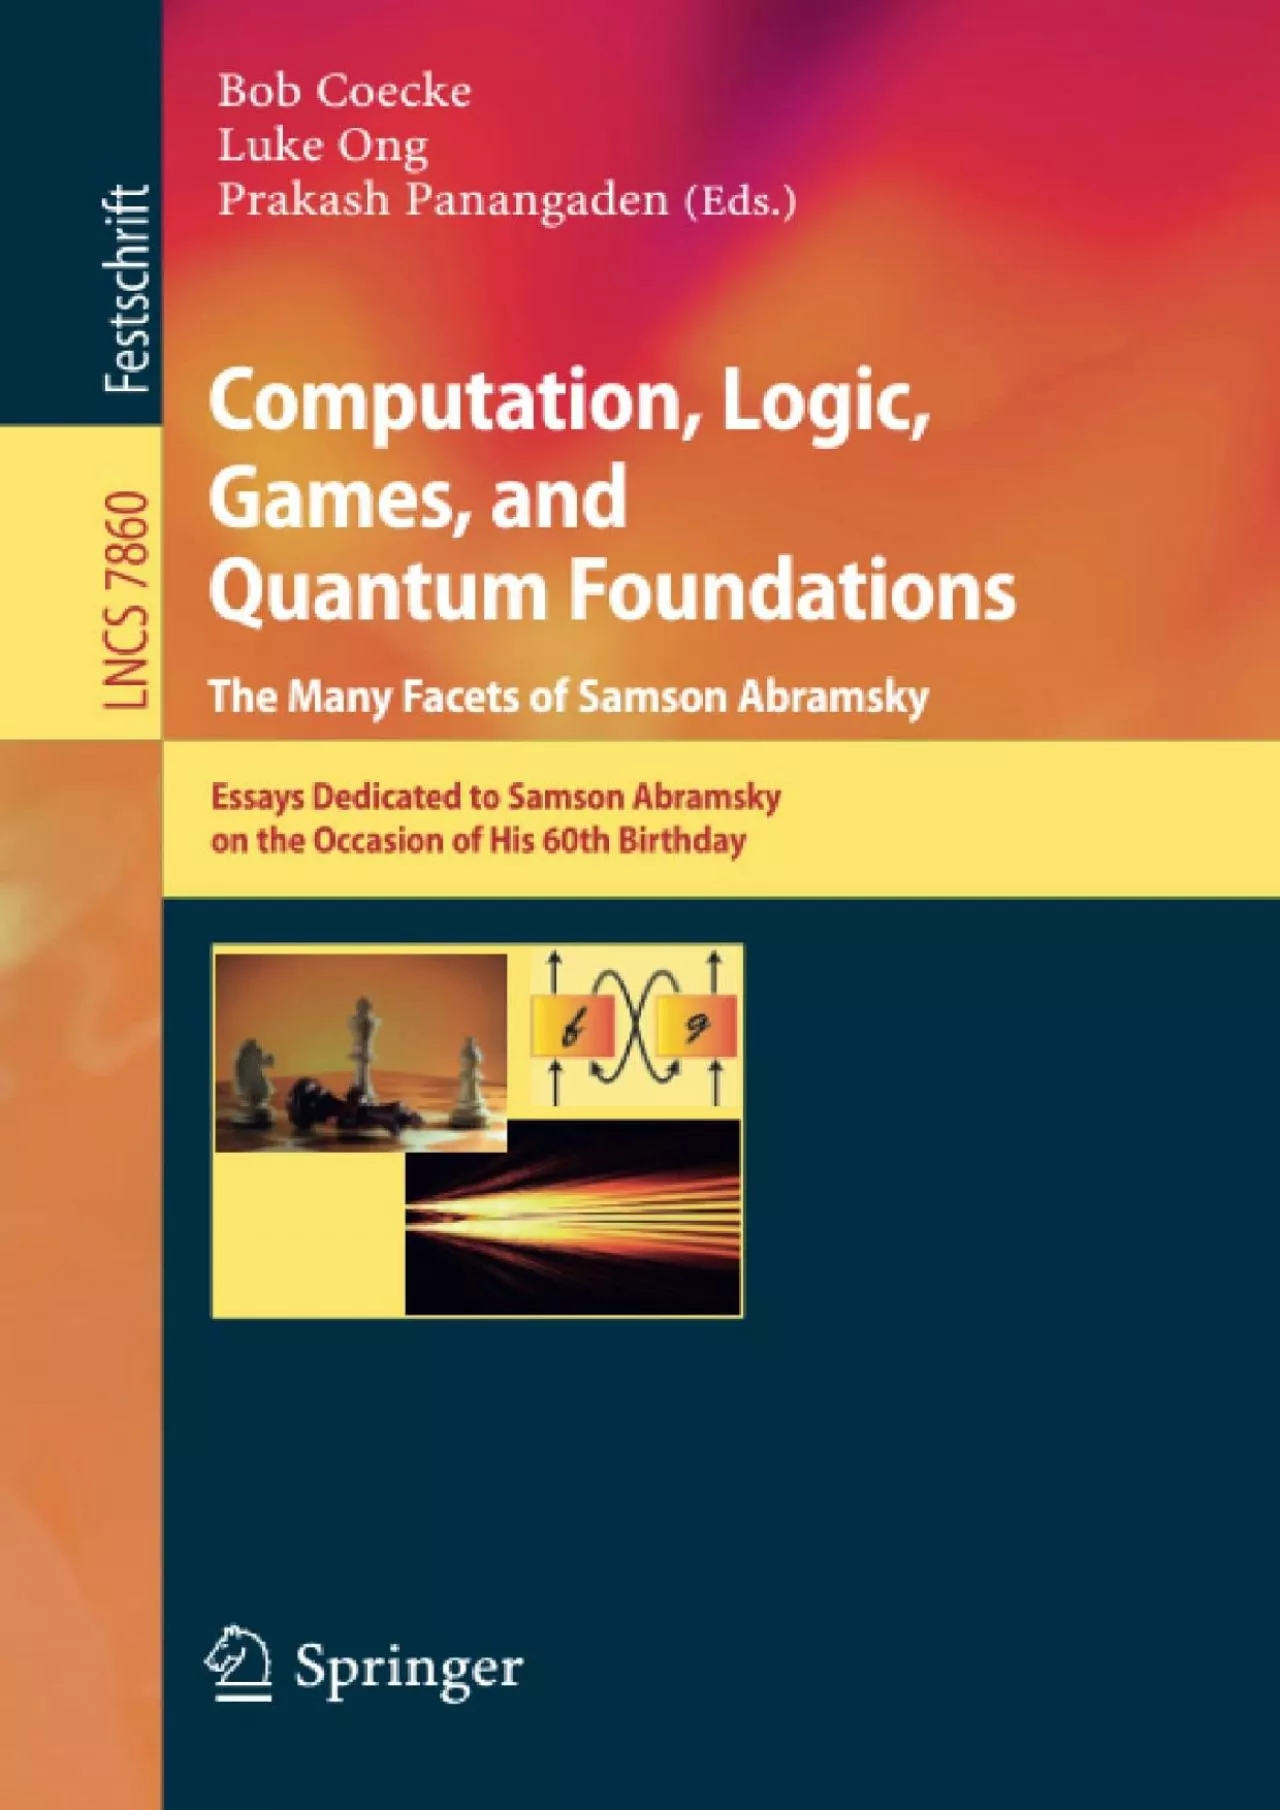 [FREE]-Computation, Logic, Games, and Quantum Foundations - The Many Facets of Samson